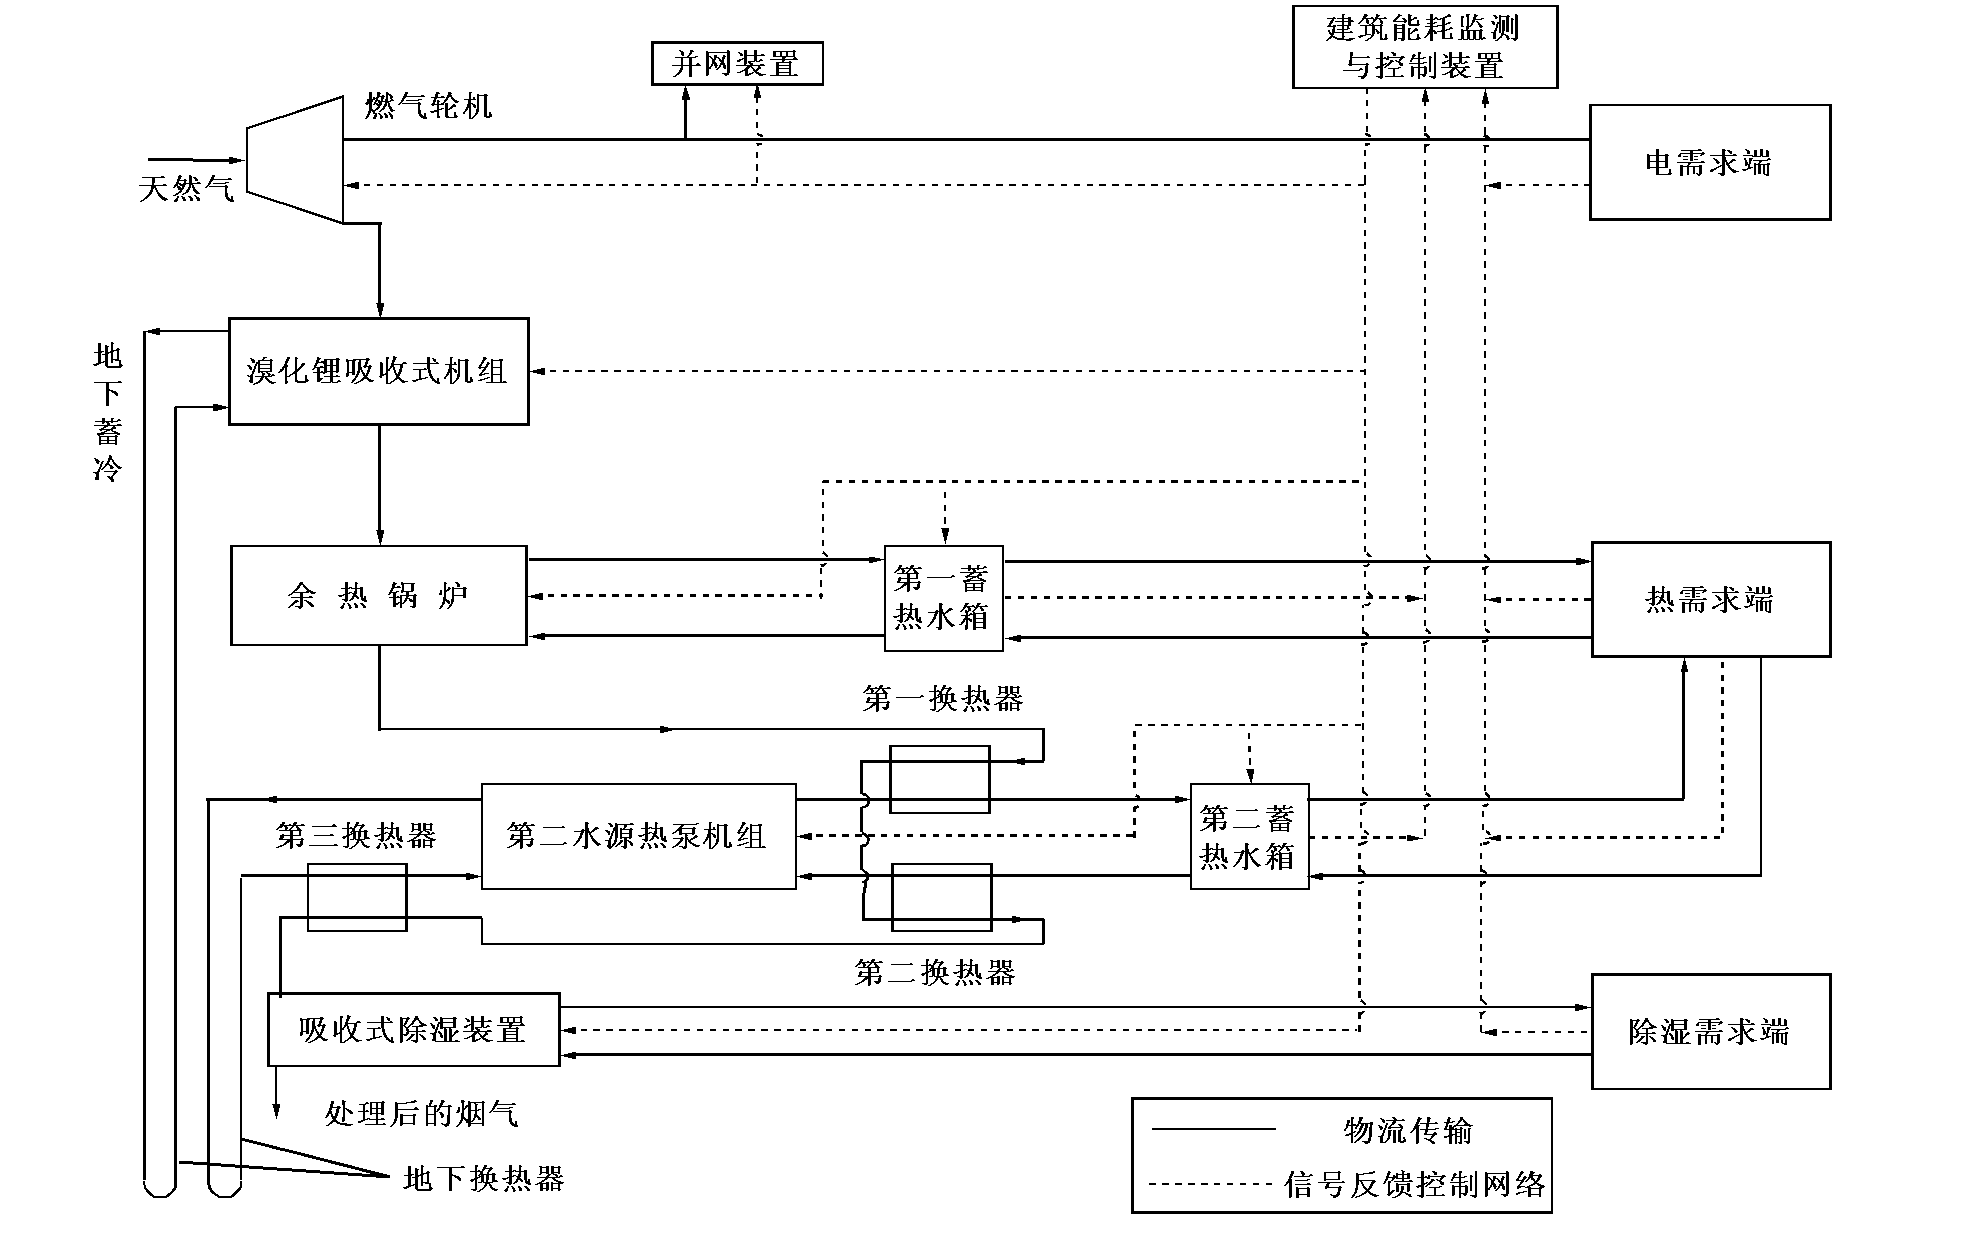 Hybrid type energy supply system coupling natural gas based distributed energy source system with ground source heat pump